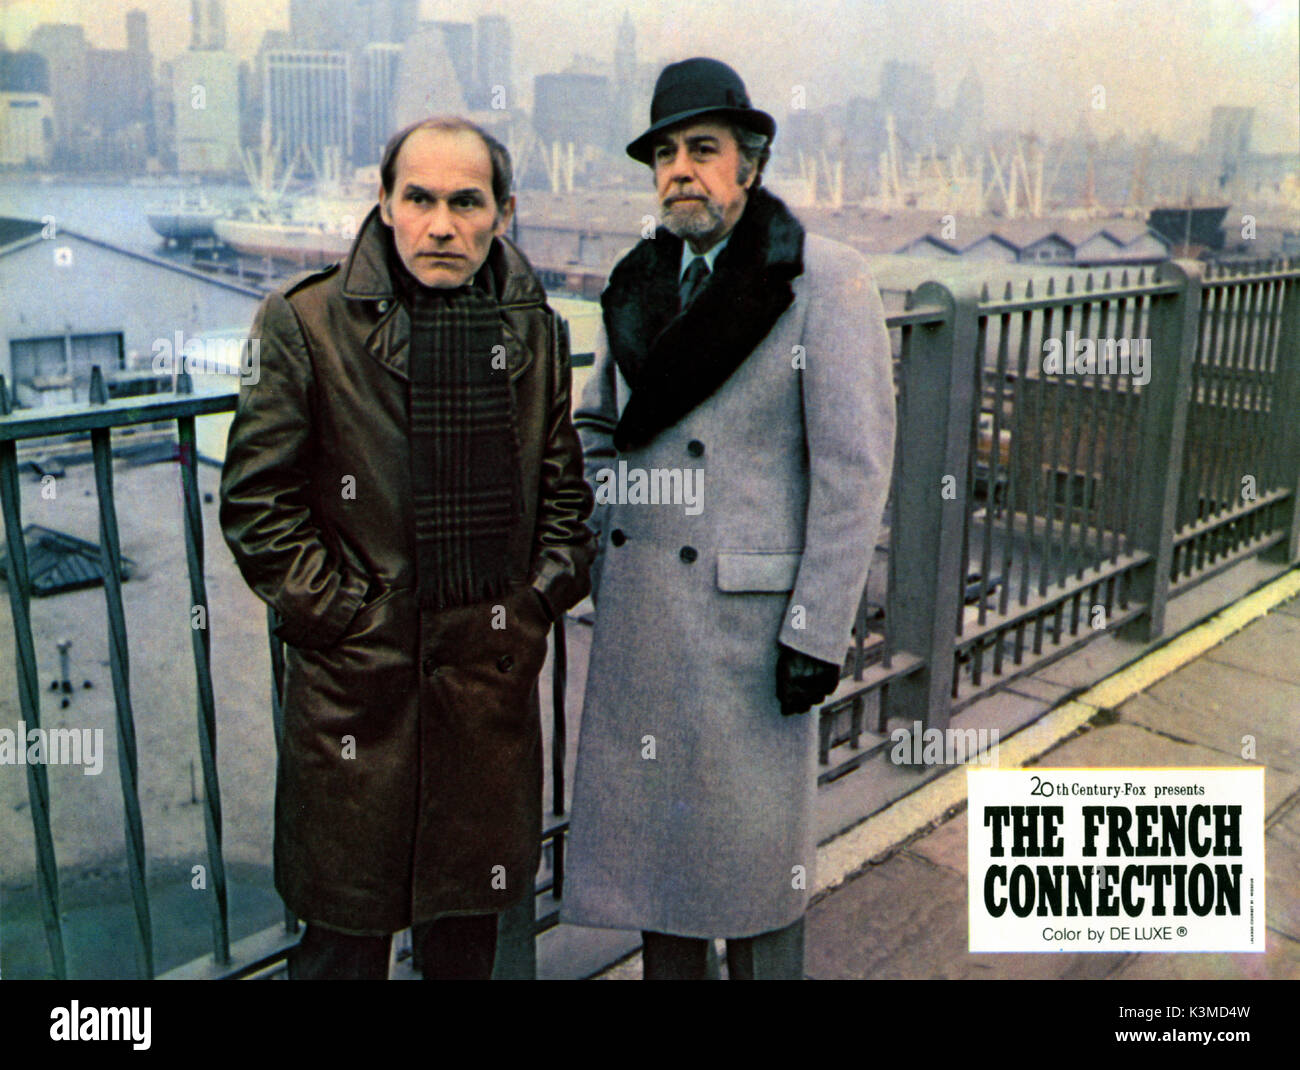 THE FRENCH CONNECTION [US 1971] MARCEL BOZZUFFI, FERNANDO REY     Date: 1971 Stock Photo